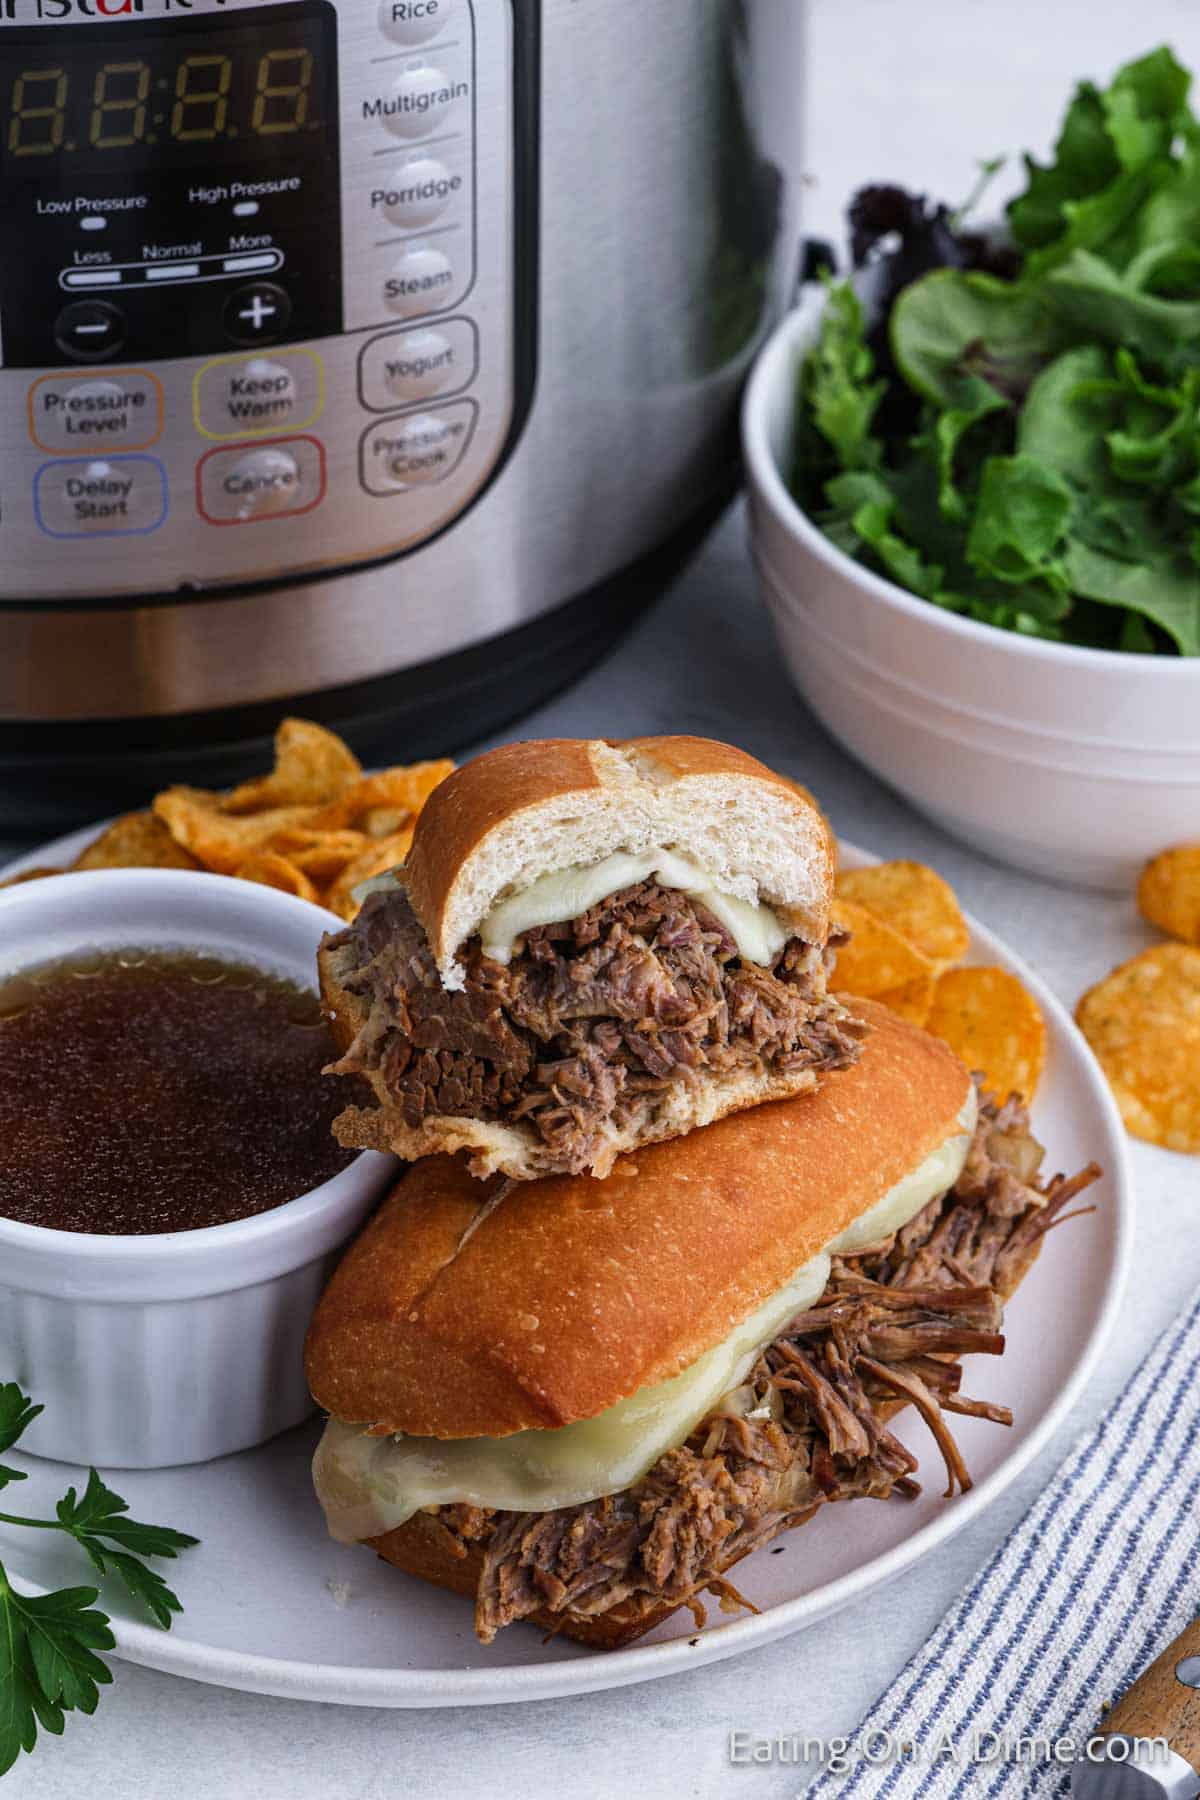 French Dip Sandwiches stacked on a plate with chips and au jus sauce with an instant pot in the background